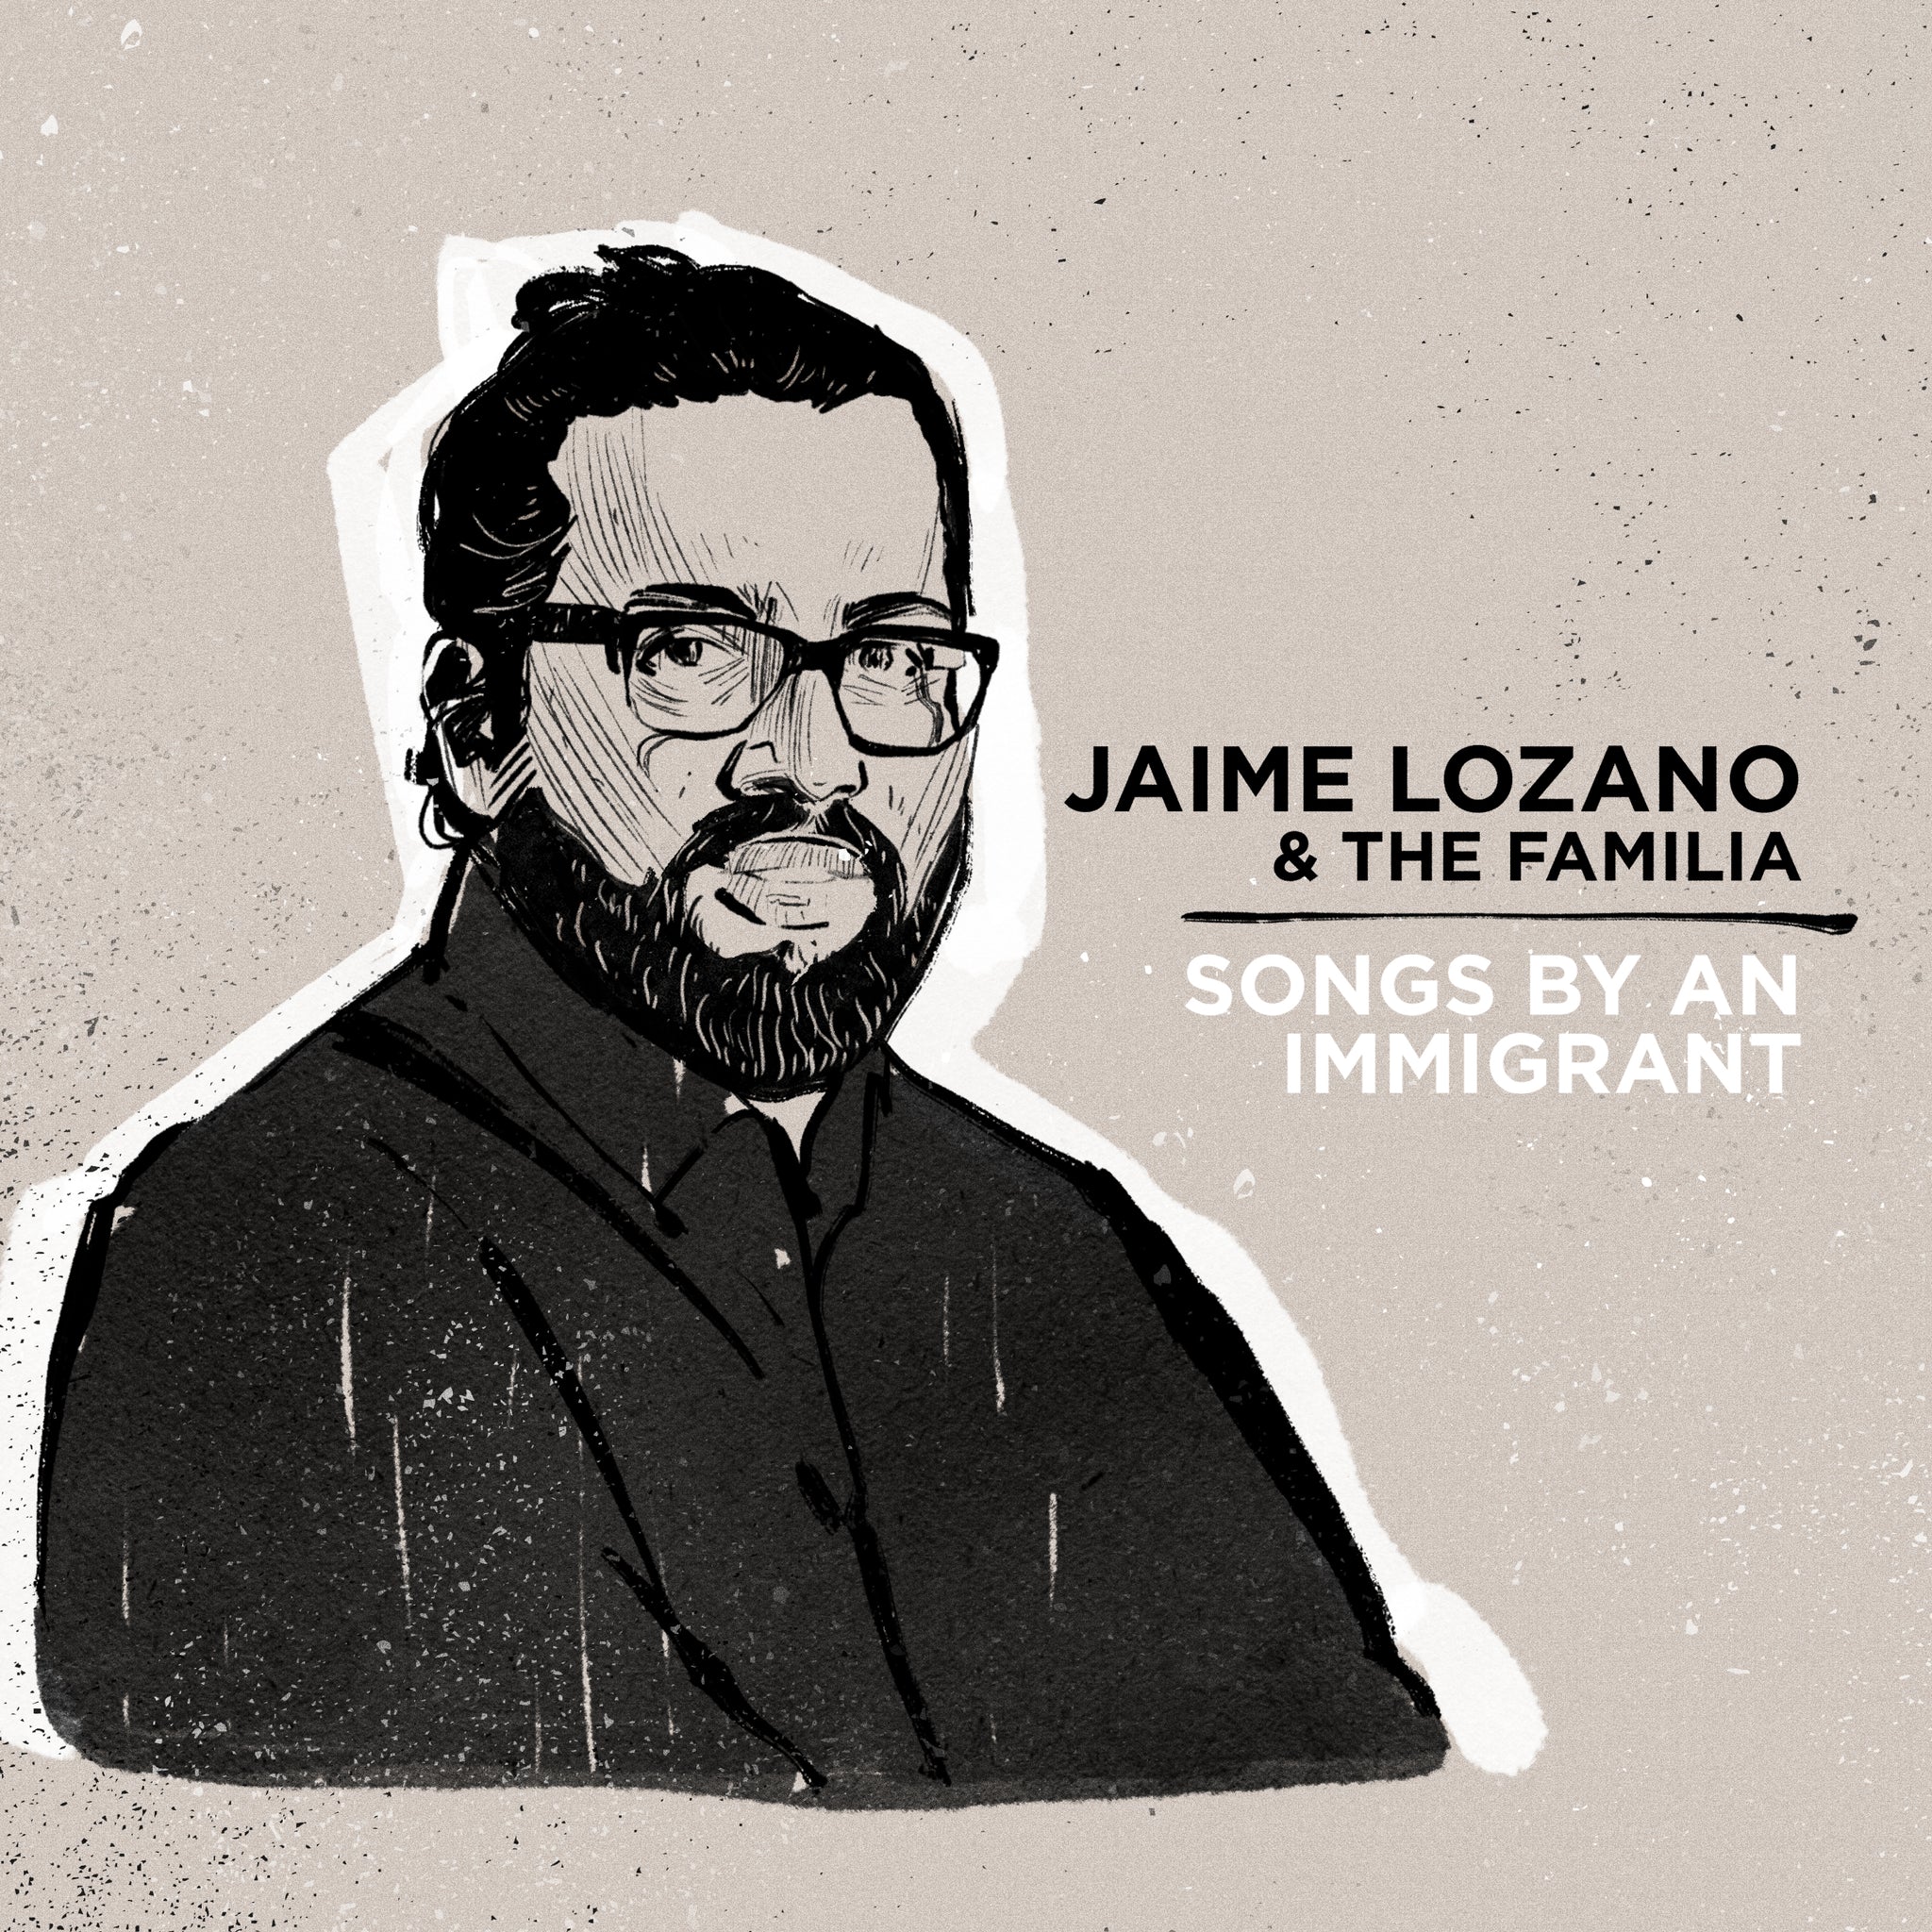 Jaime Lozano & The Familia: Songs By an Immigrant [CD]